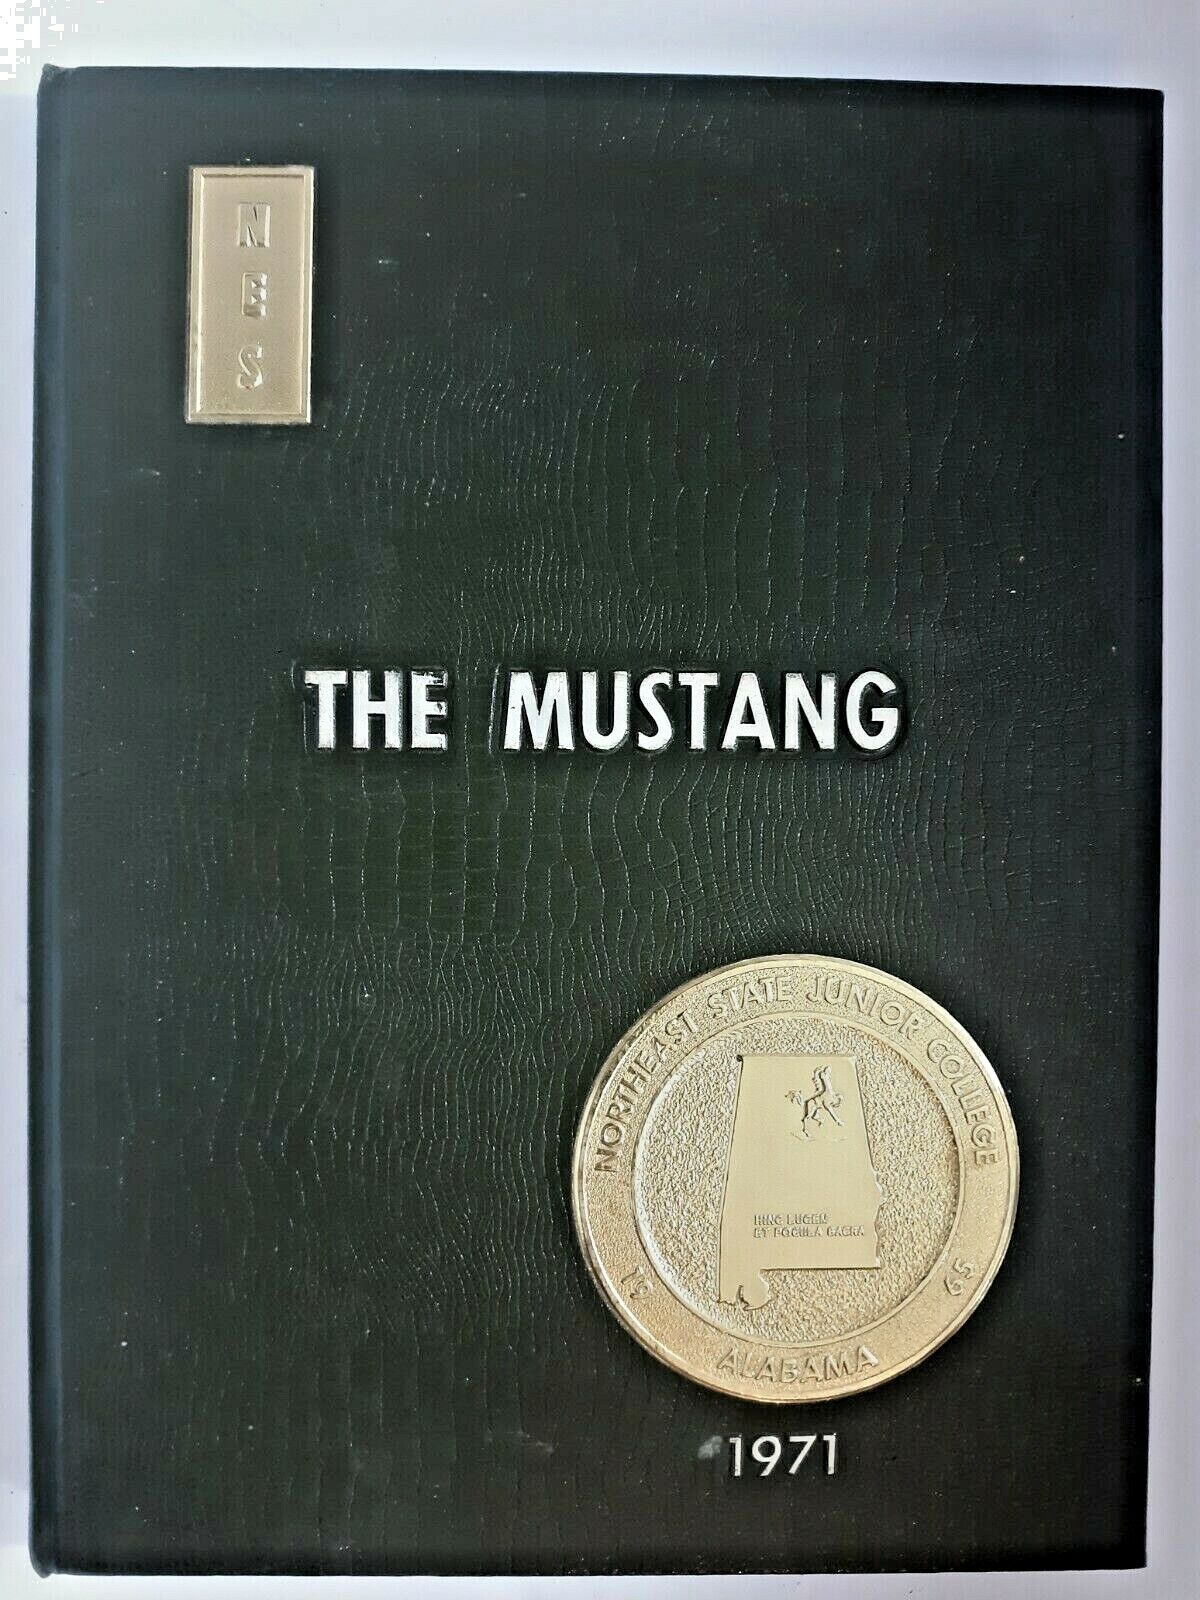 THE MUSTANG 1971 Northeast State Junior College  Alabama  vol-6 pre-owned annual